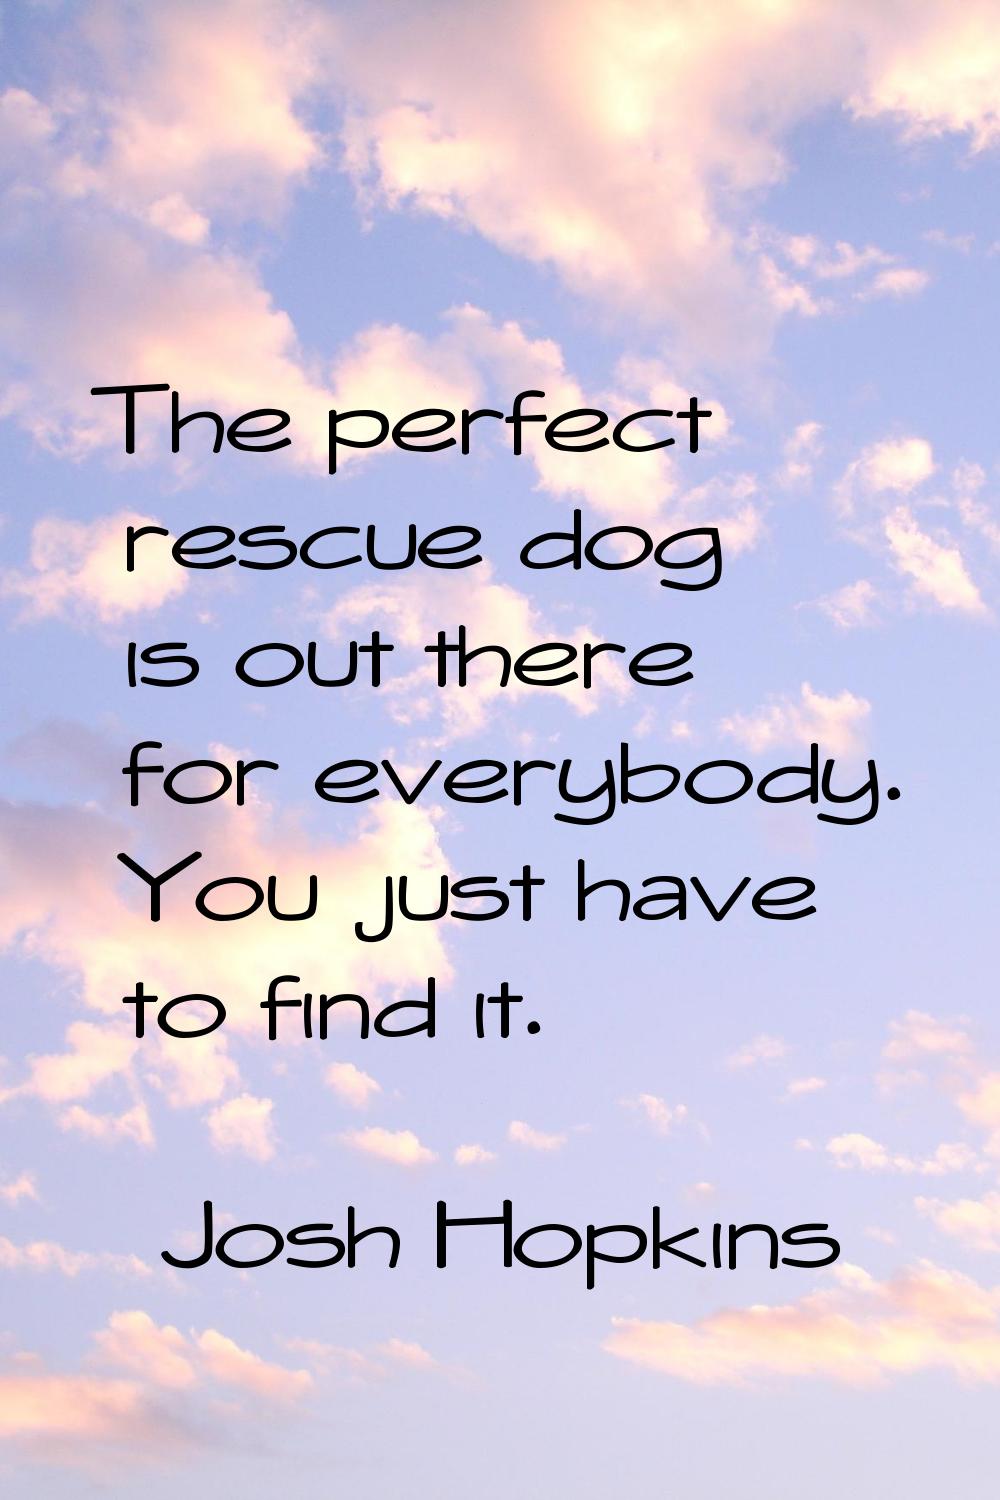 The perfect rescue dog is out there for everybody. You just have to find it.